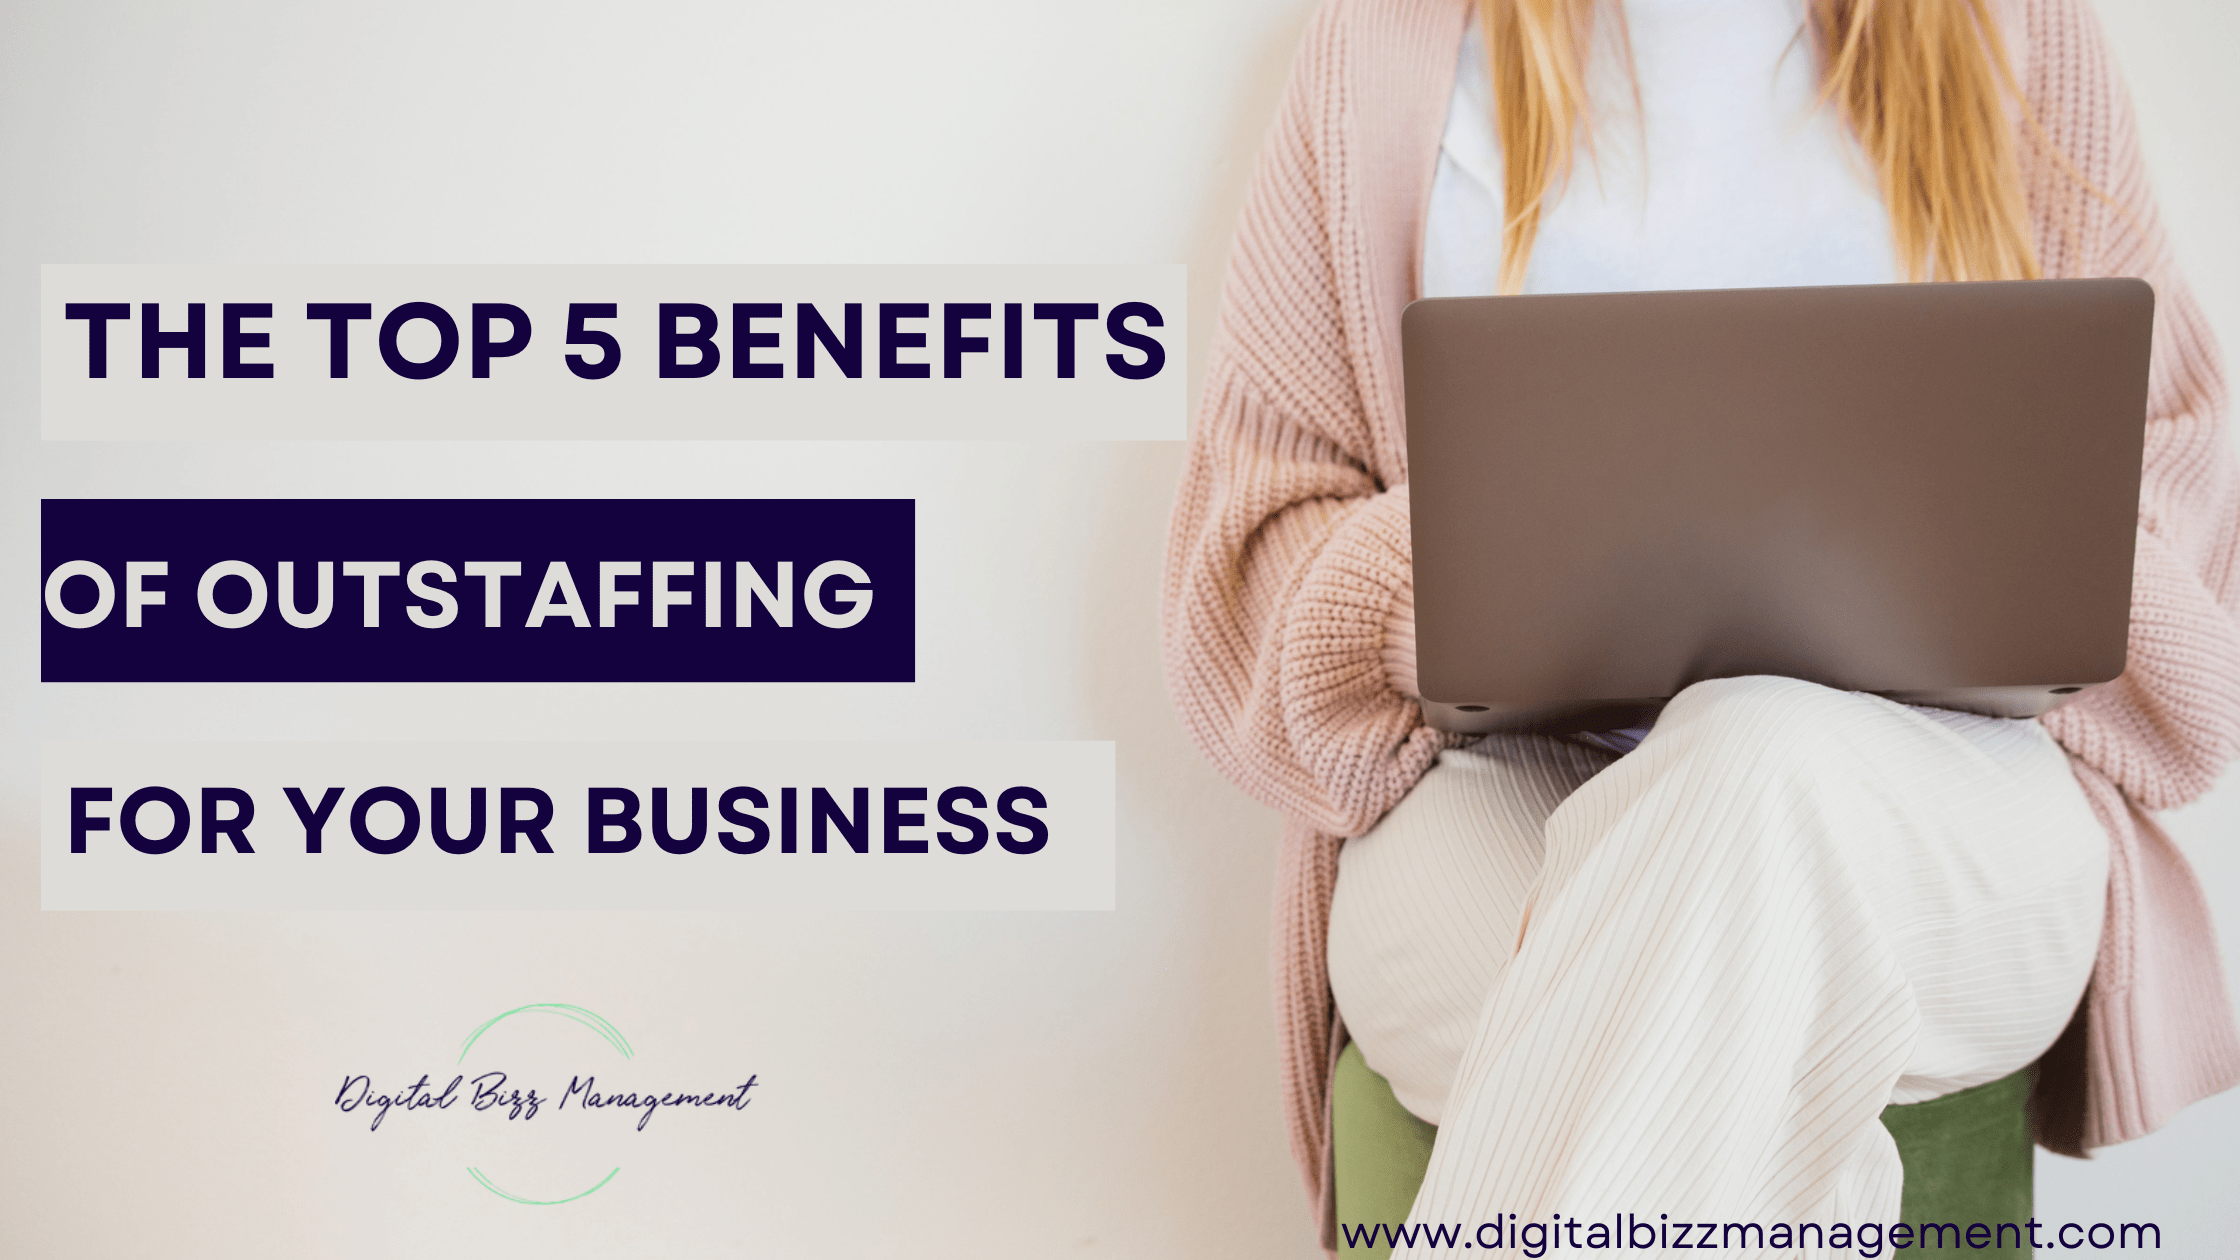 Digital Bizz Management - The top 5 Benefits of Outstaffing for your business